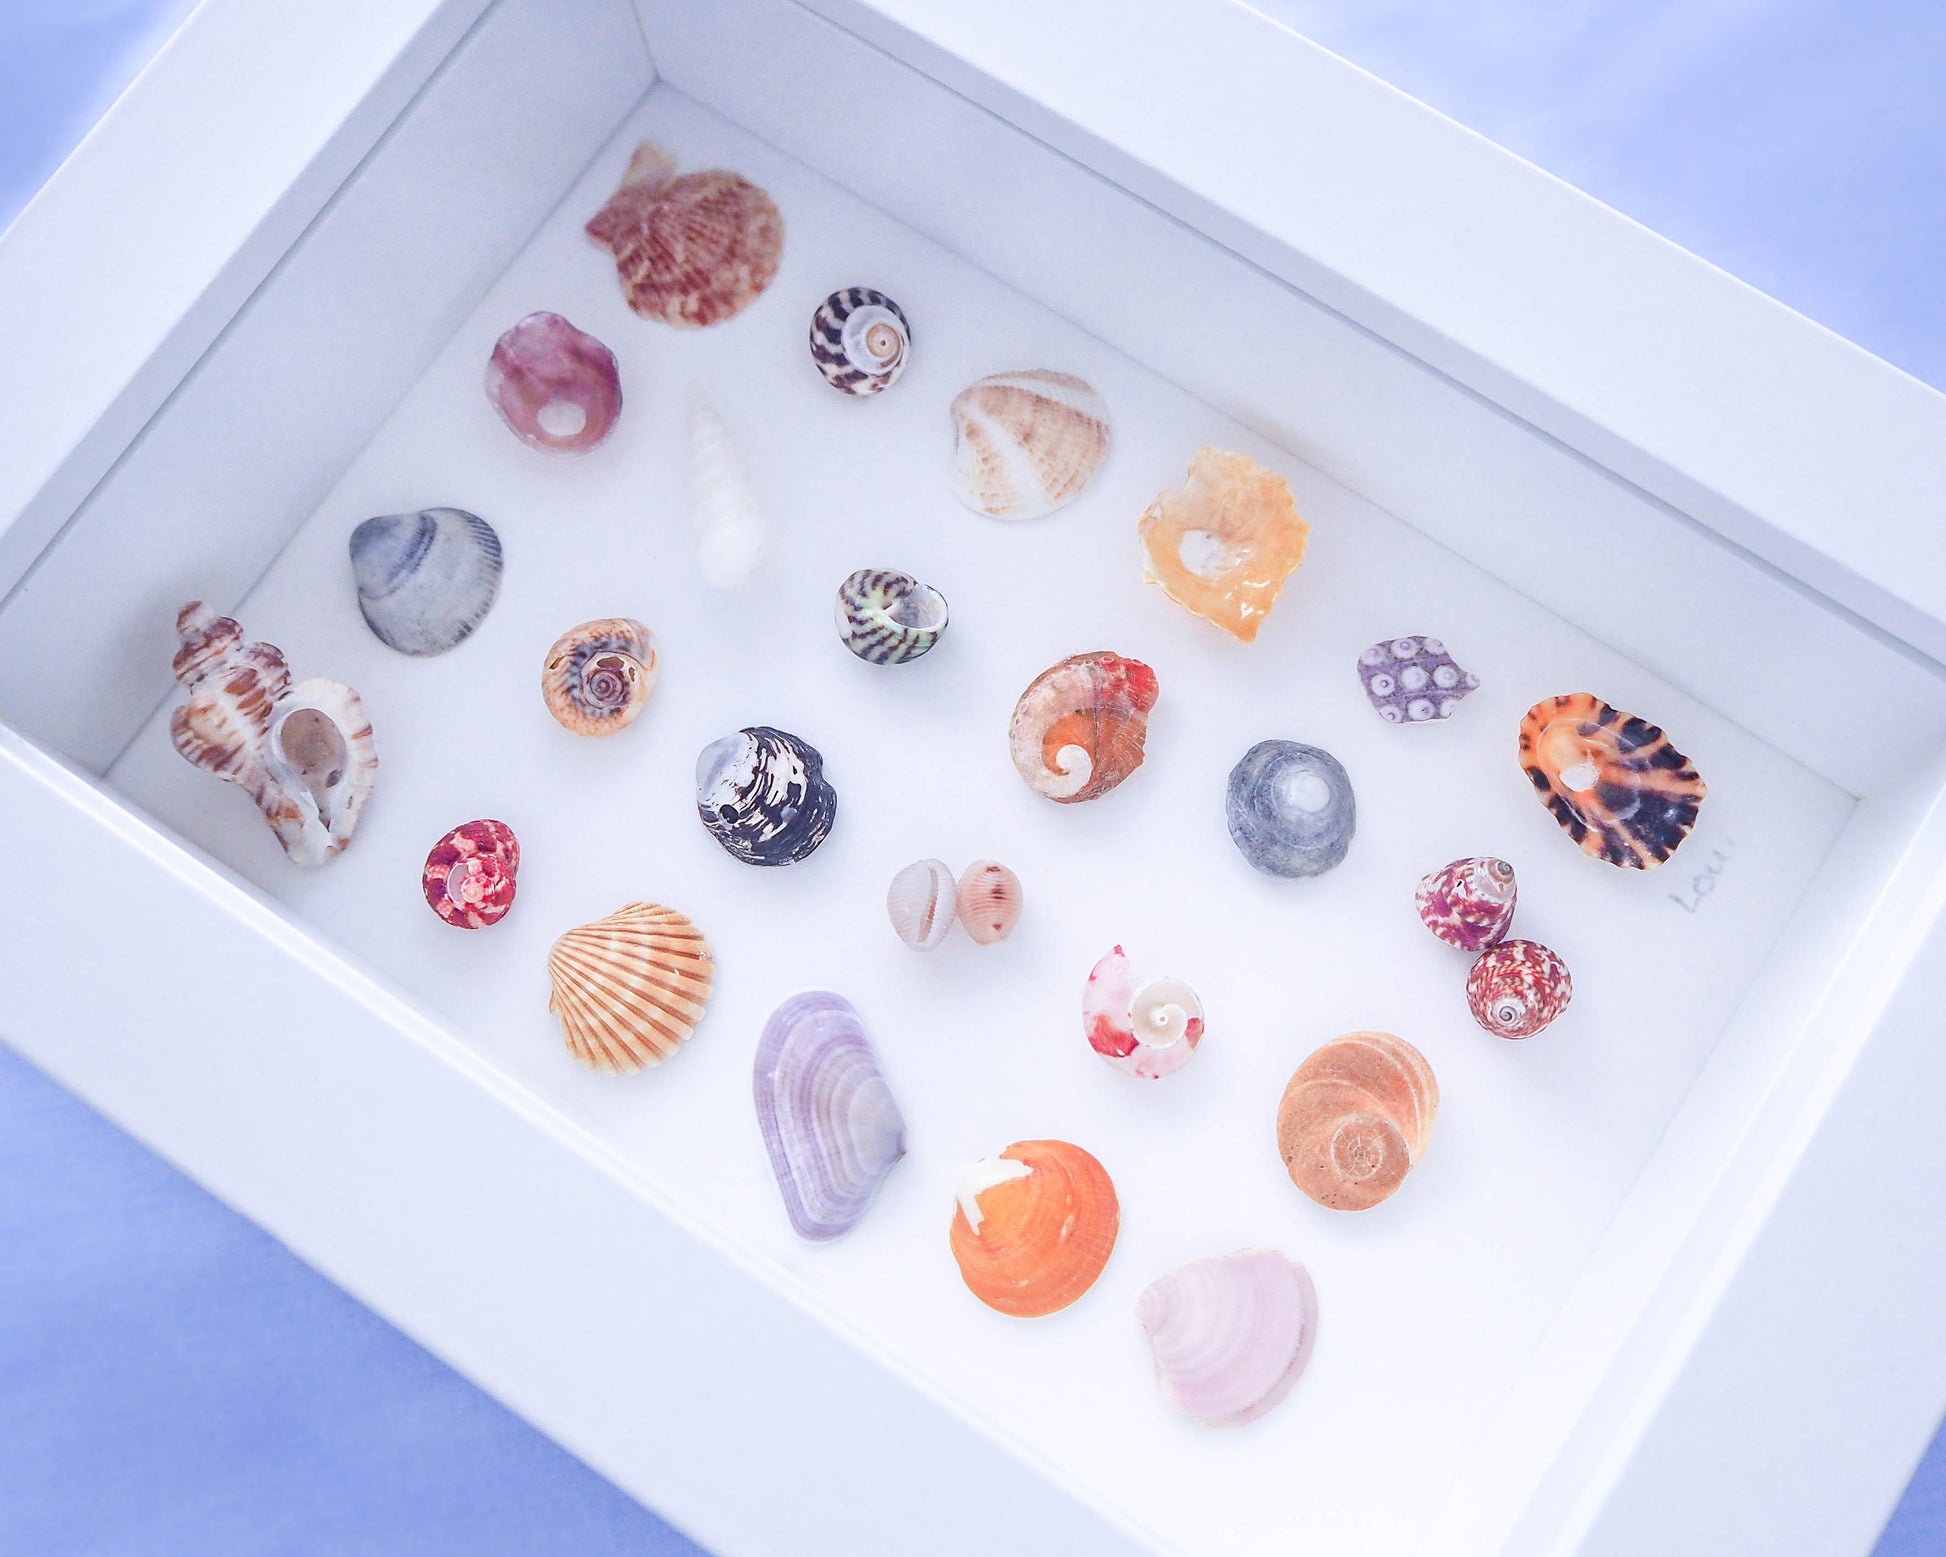 A captivating overview of the Portuguese Seashore Mini Mix featuring 24 tiny beach treasures curated in a miniature masterpiece, seabylou, SEA by LOU